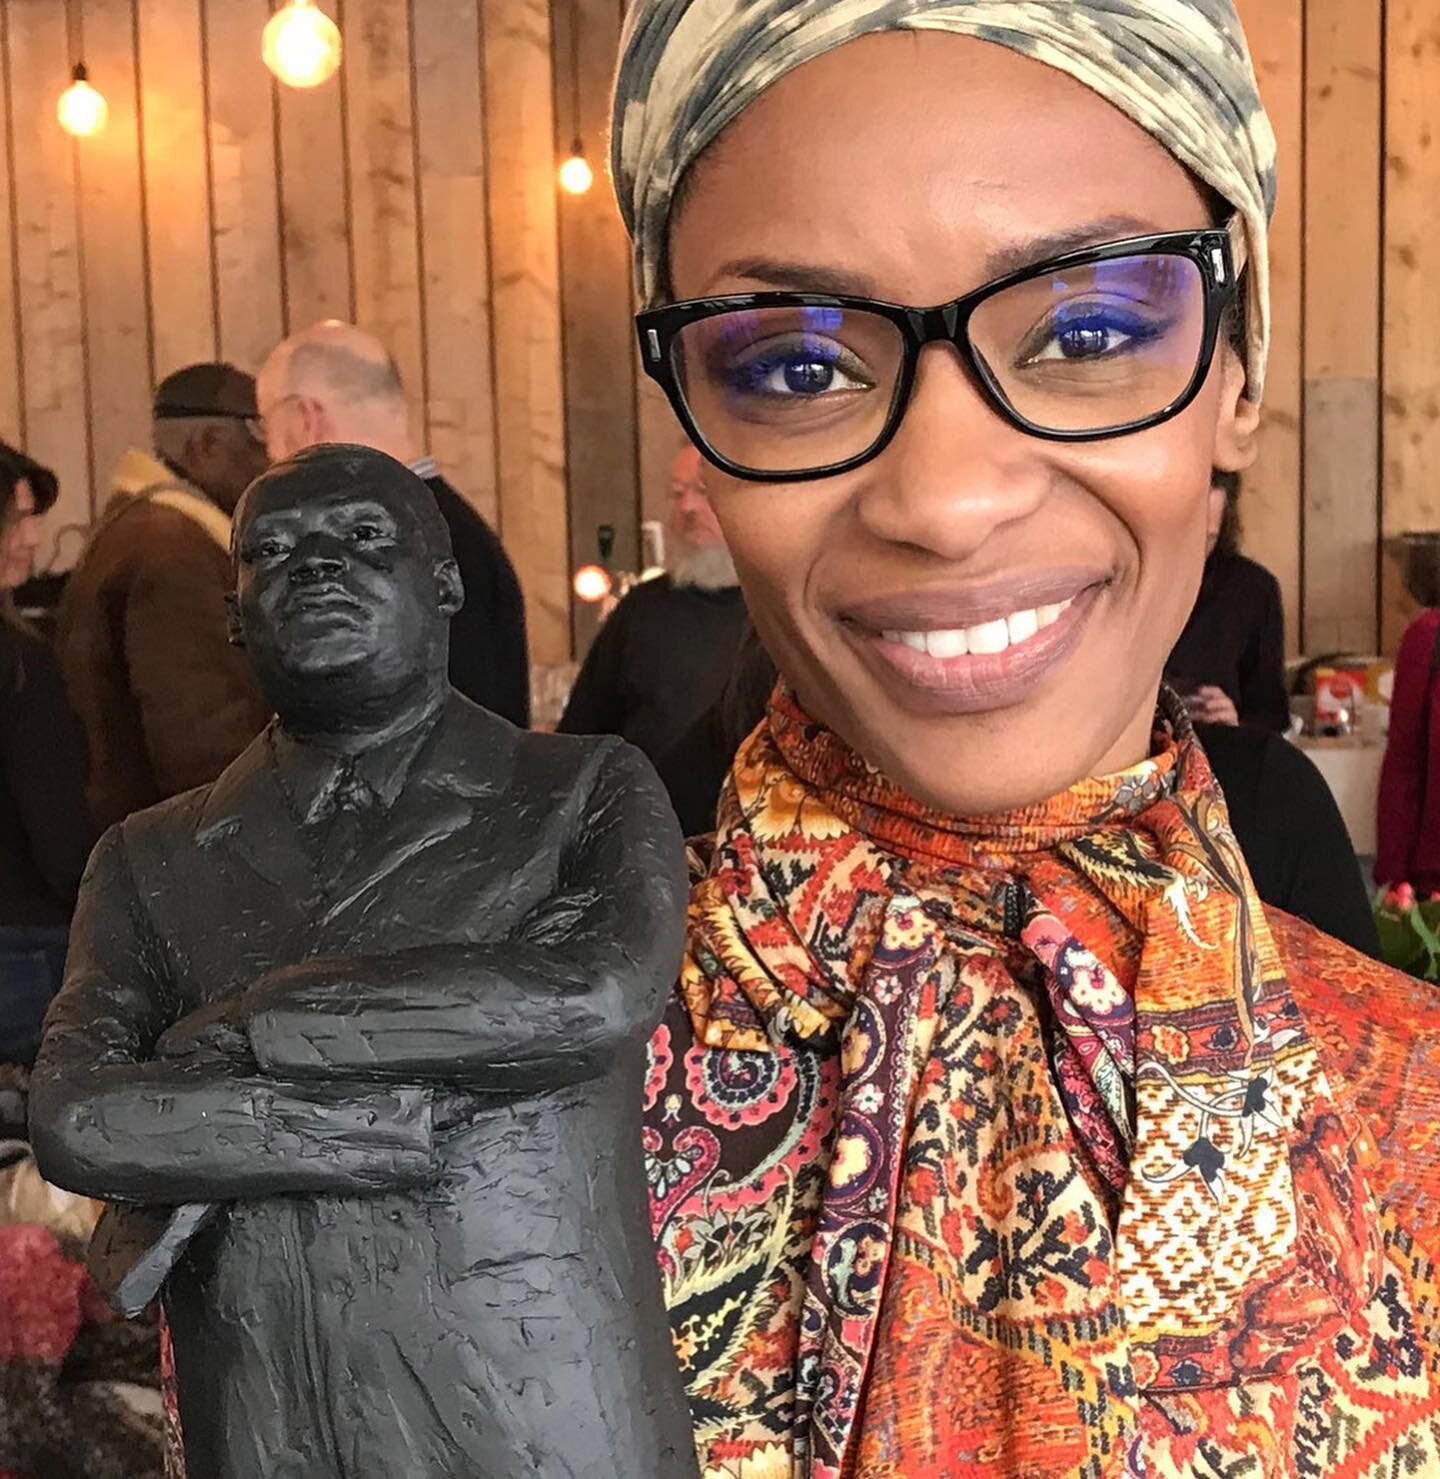 💥Throwback Thursday! Today March 21, 2018, @sylvanasimons - the first black woman in Europe who founded a political party, a true hero, was elected in Amsterdam! I gave her a Martin Luther King Statue, to honor her fight for radical equality. 💪🏾❤️